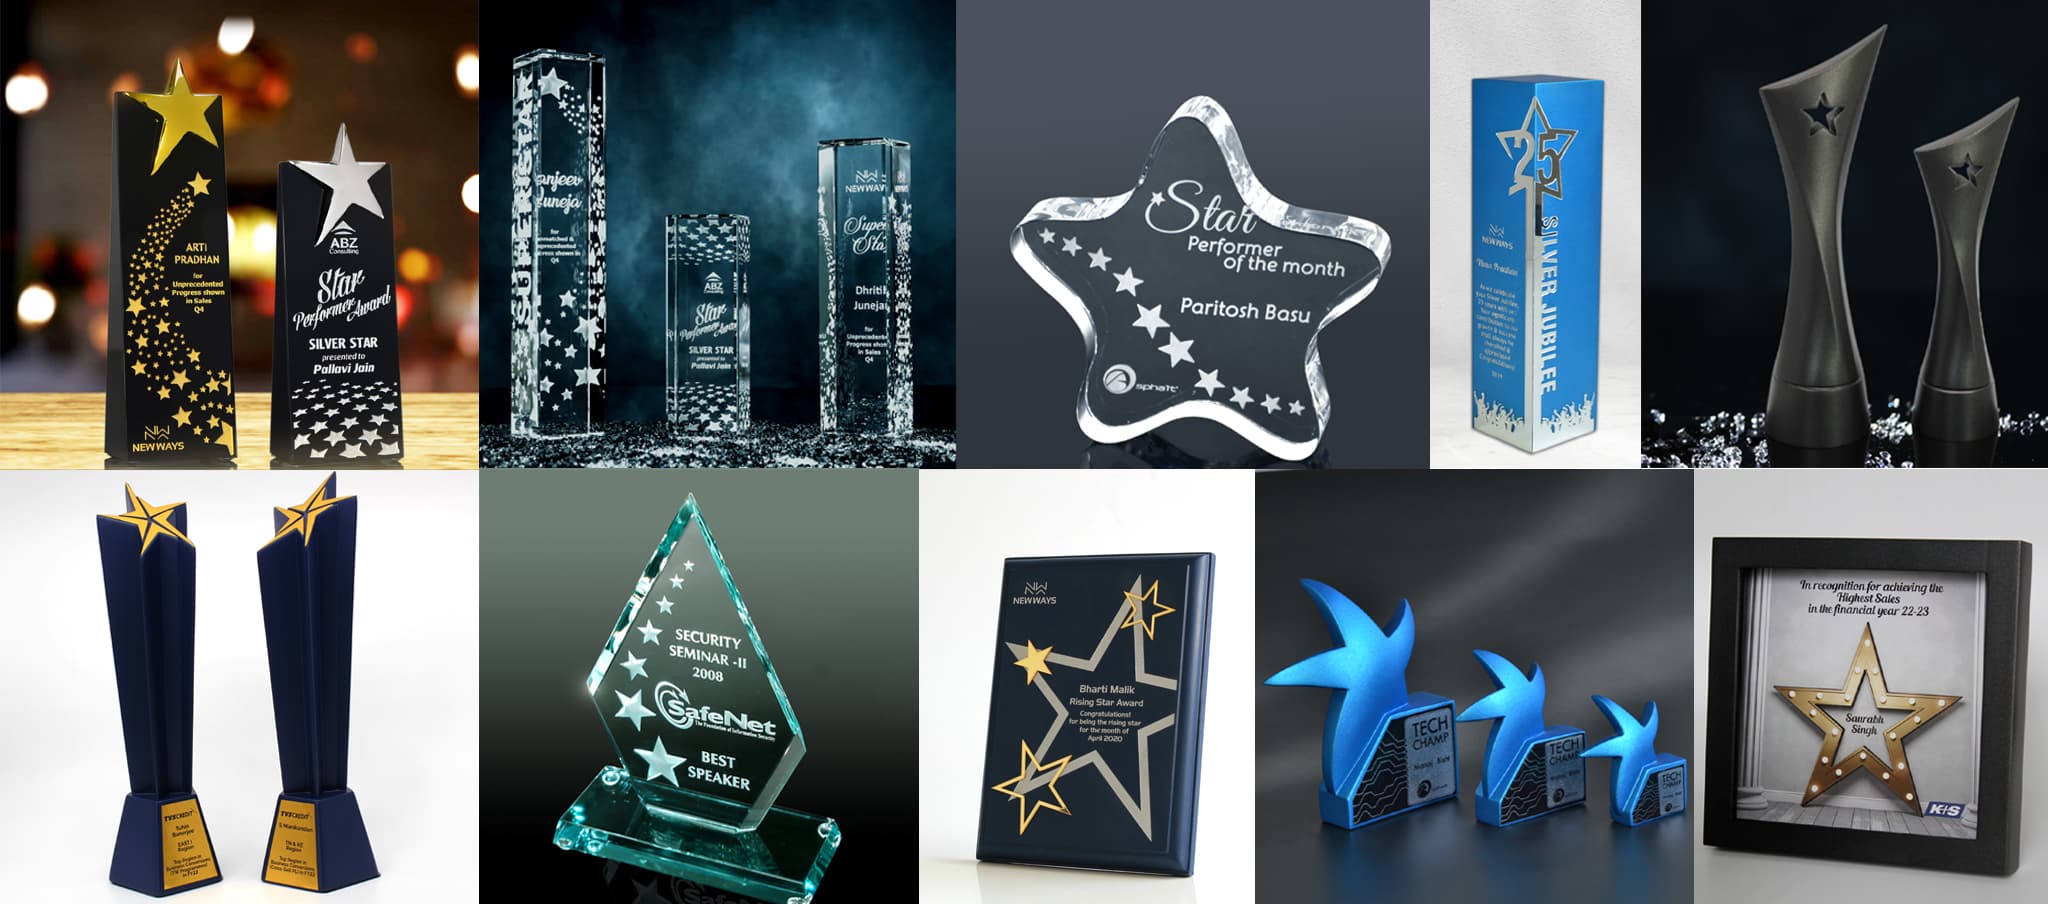 A collection of diverse awards and trophies in star designs